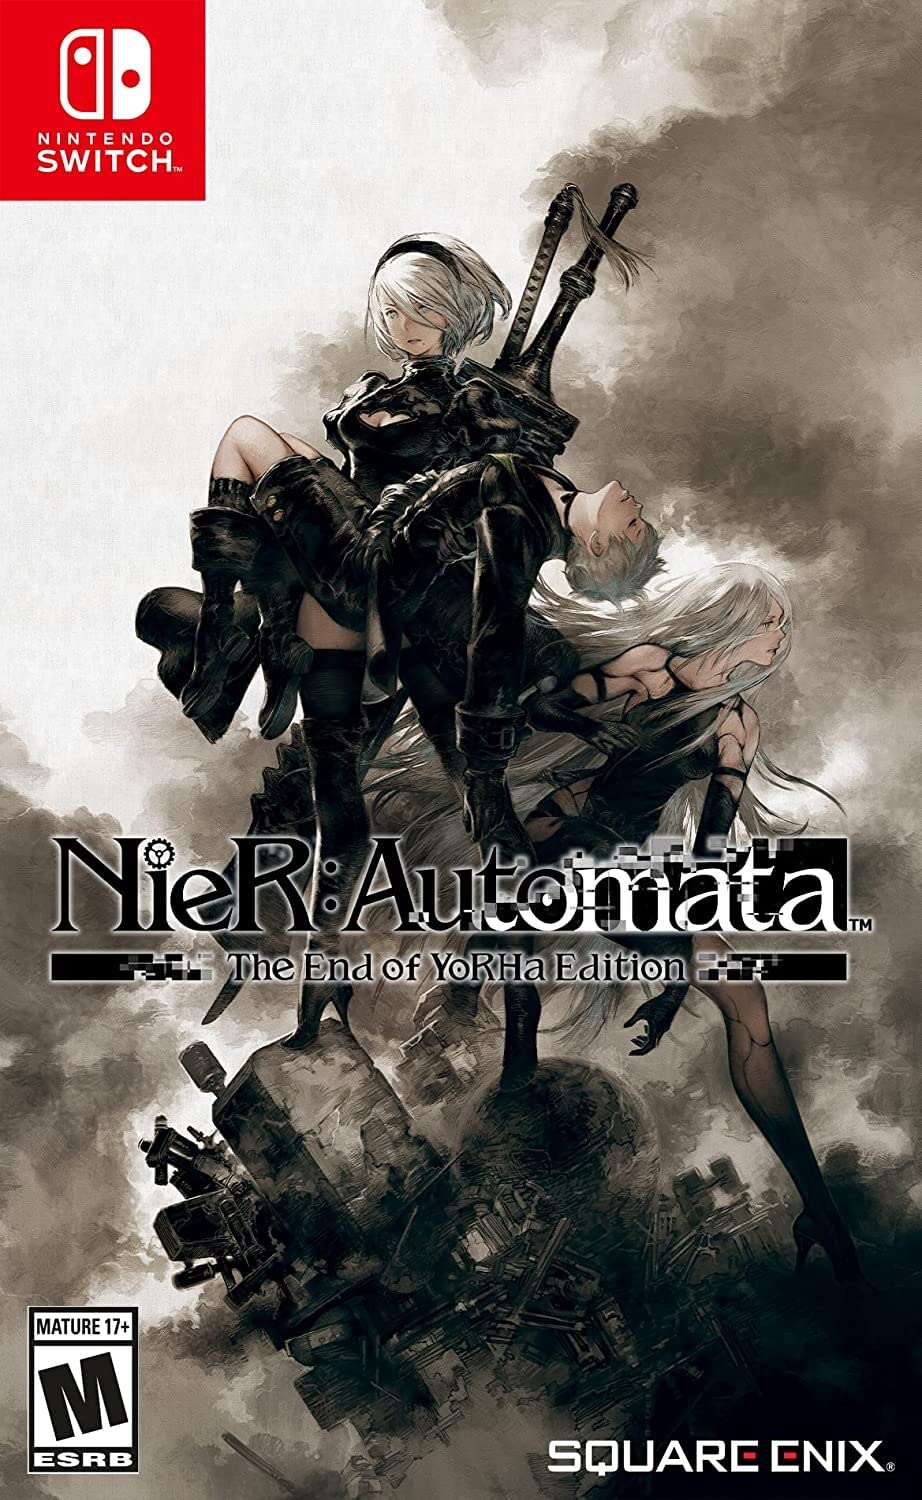 NieR:Automata The End of YoRHa Edition (Nintendo Switch Physical) $30+ Free Shipping w/ Prime or on $35+